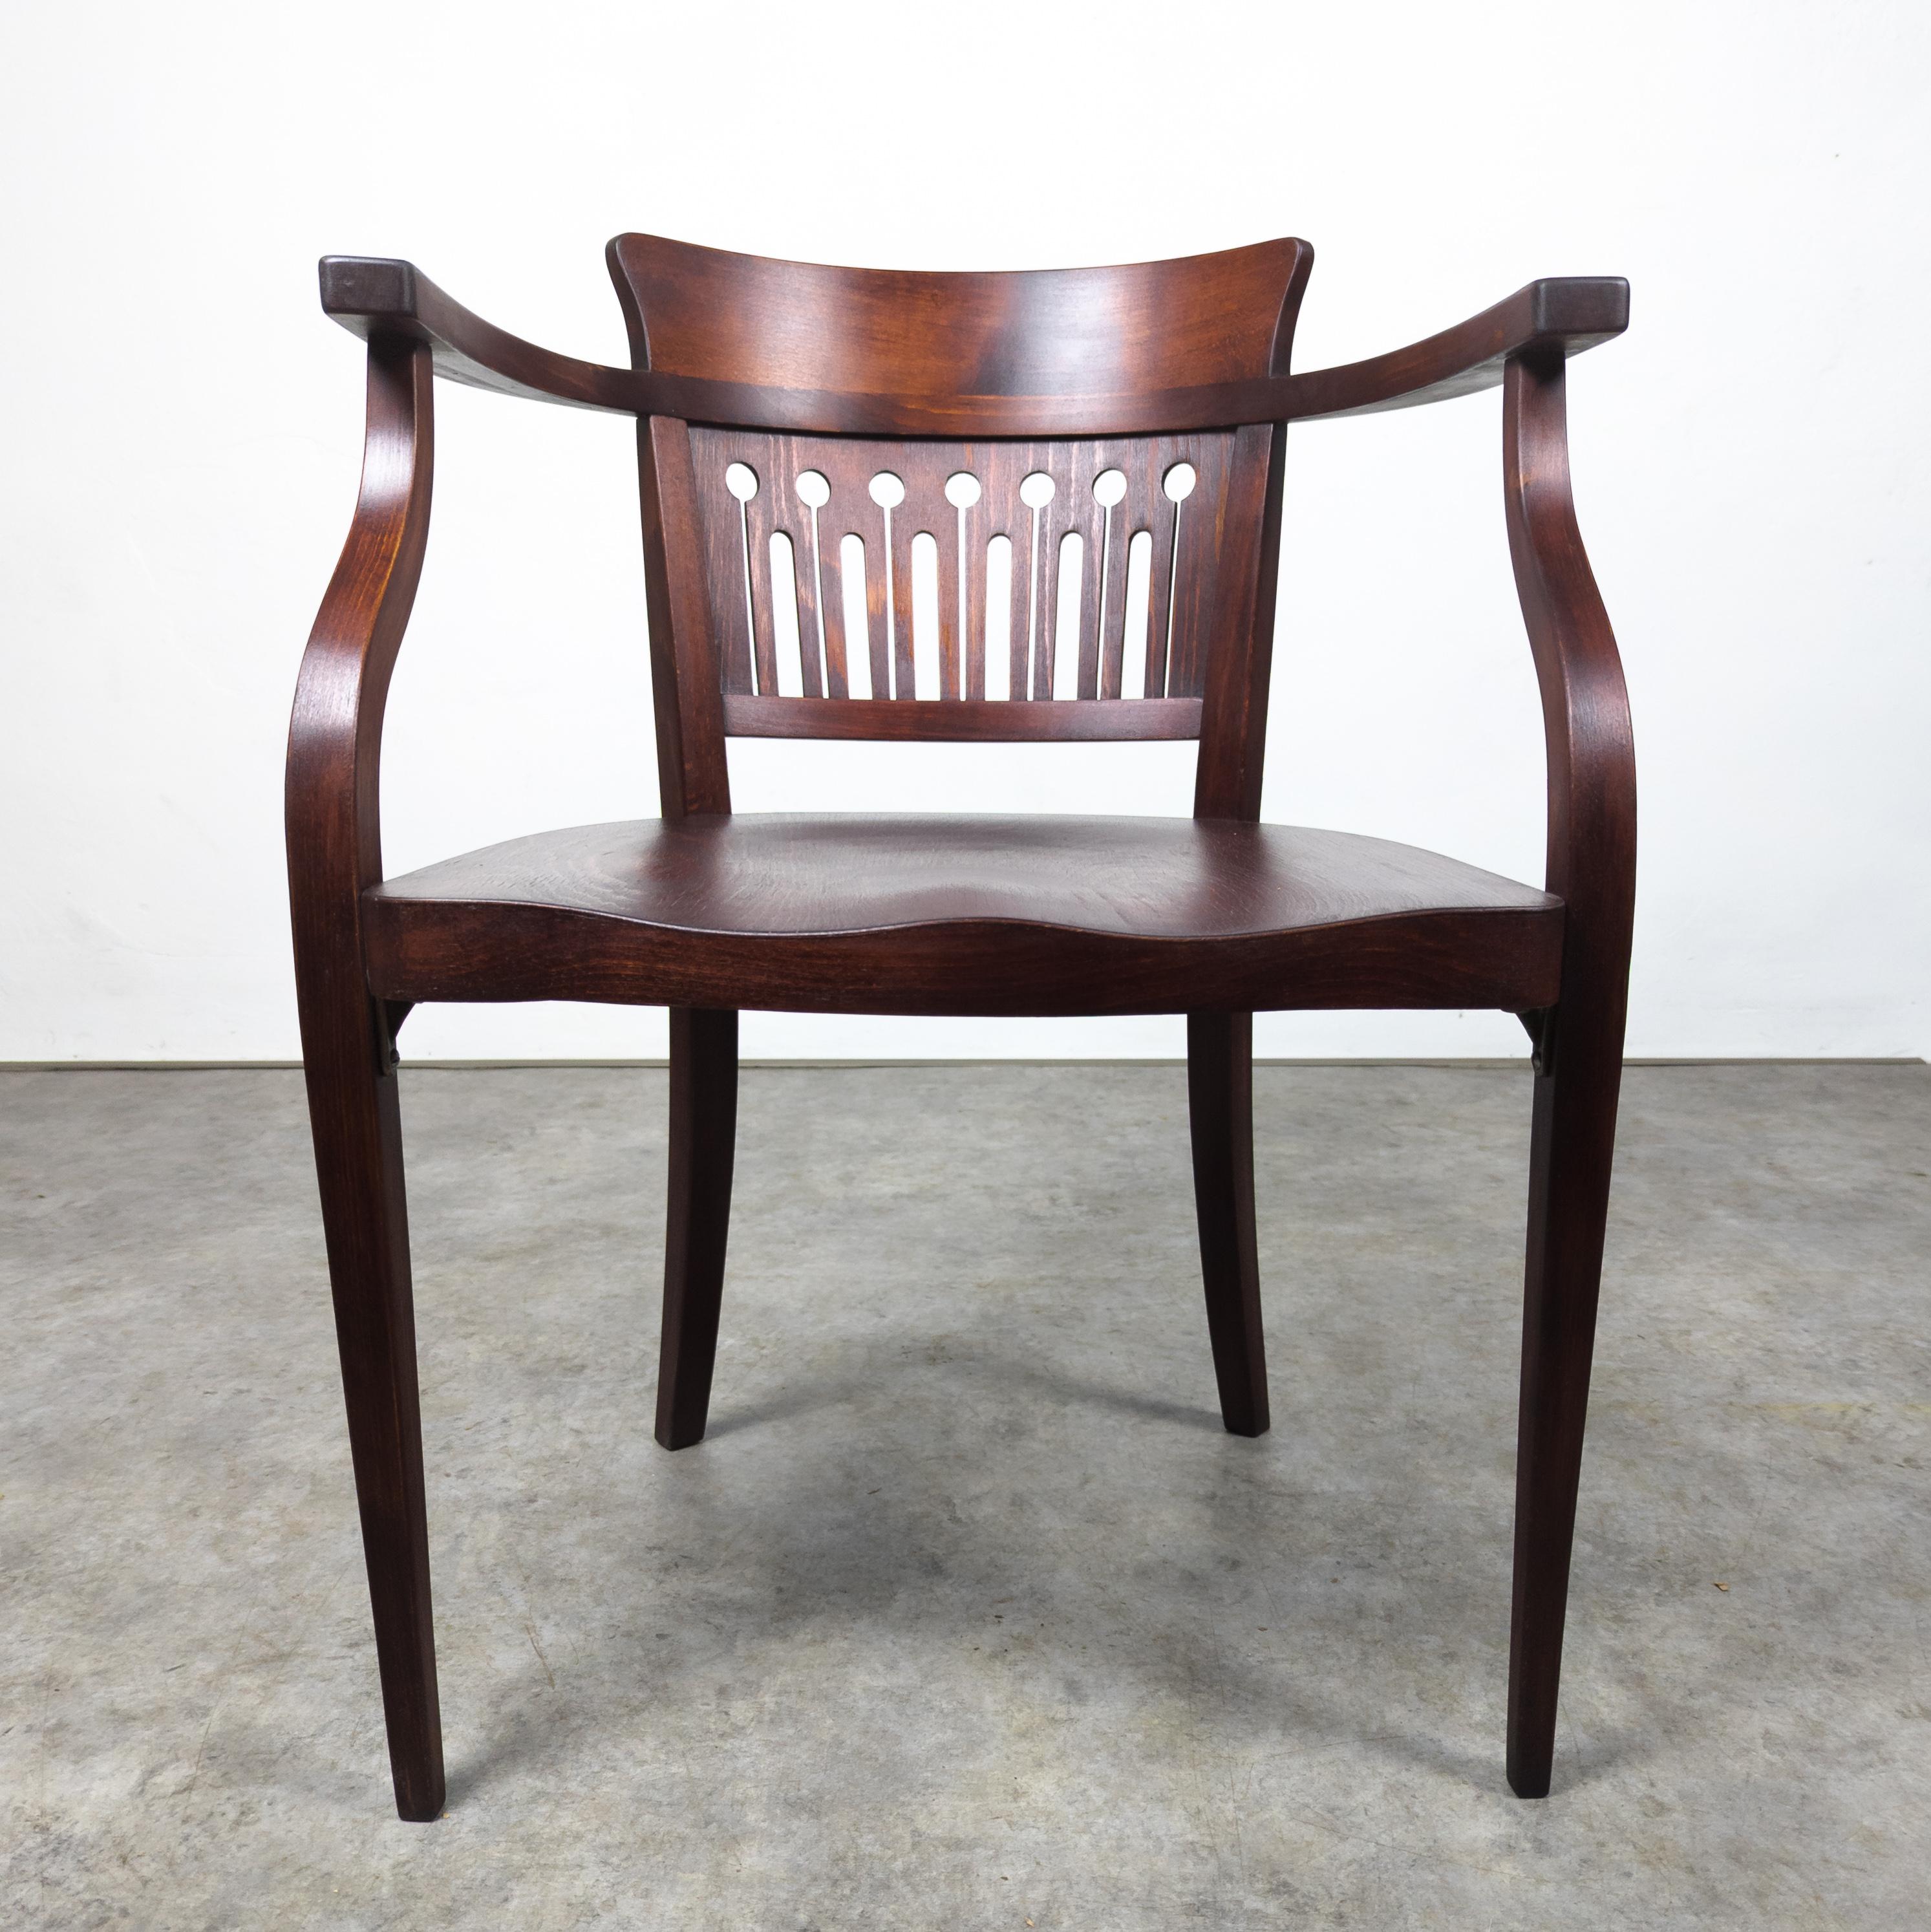 Early 20th Century Thonet No. 6515 armchair by Otto Wagner